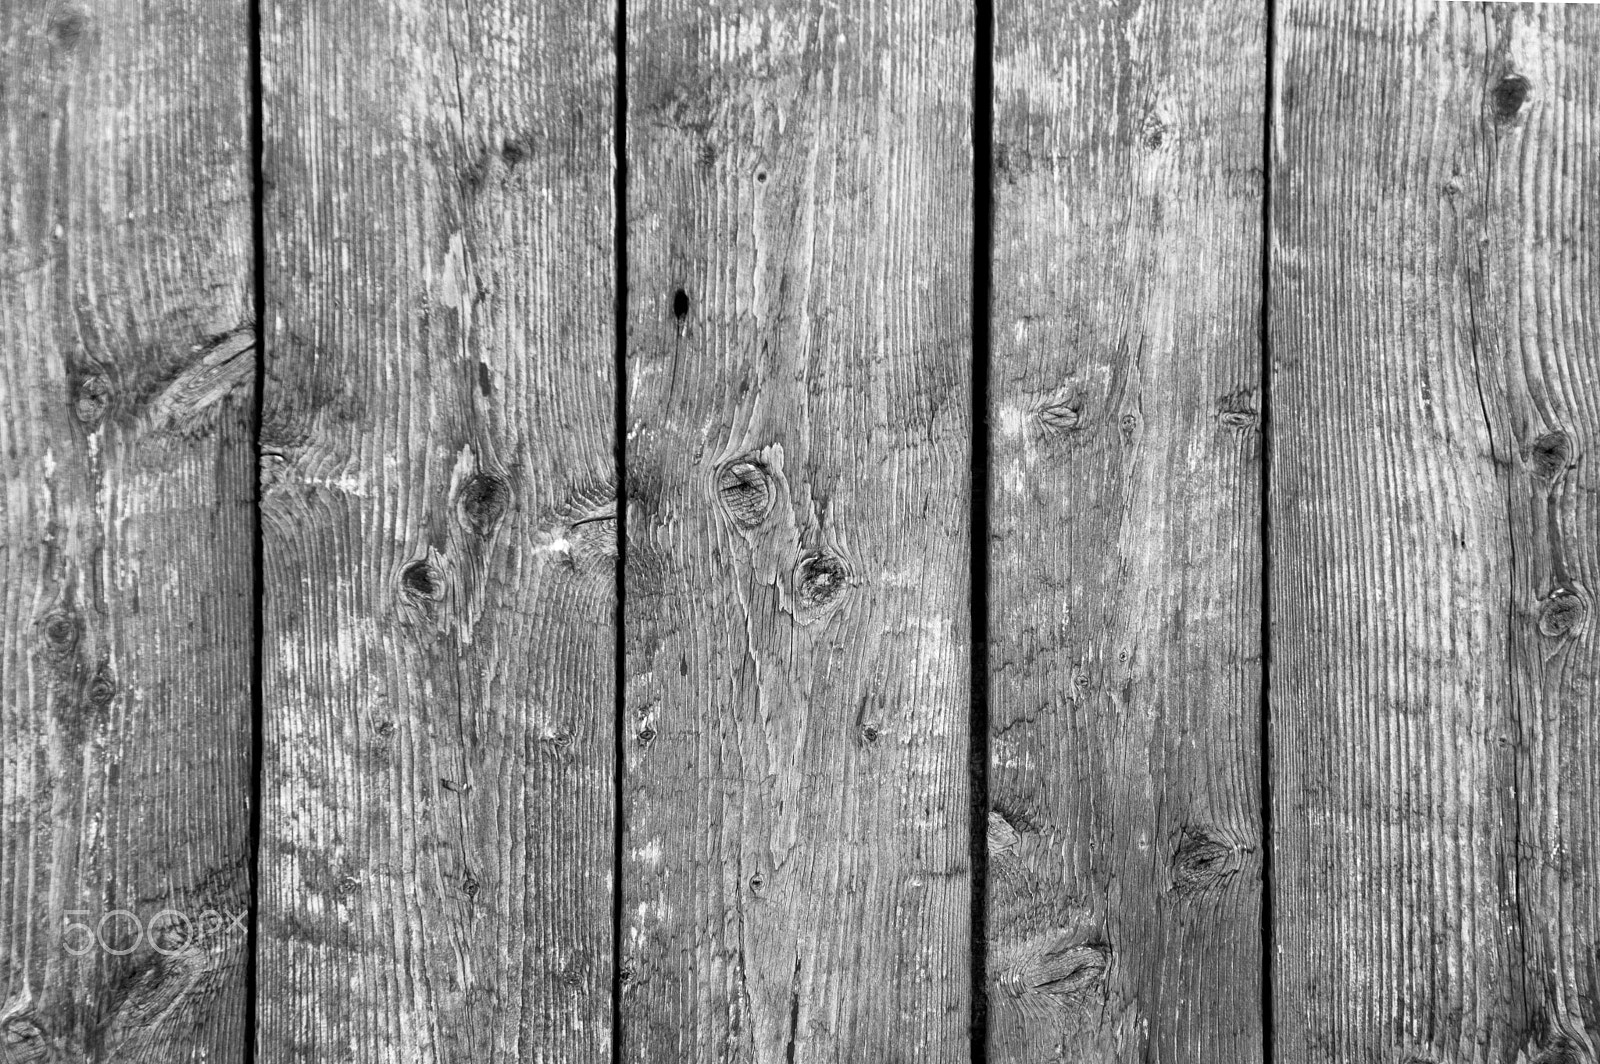 Nikon D3200 sample photo. Background of five vertical barn boards b/w photography